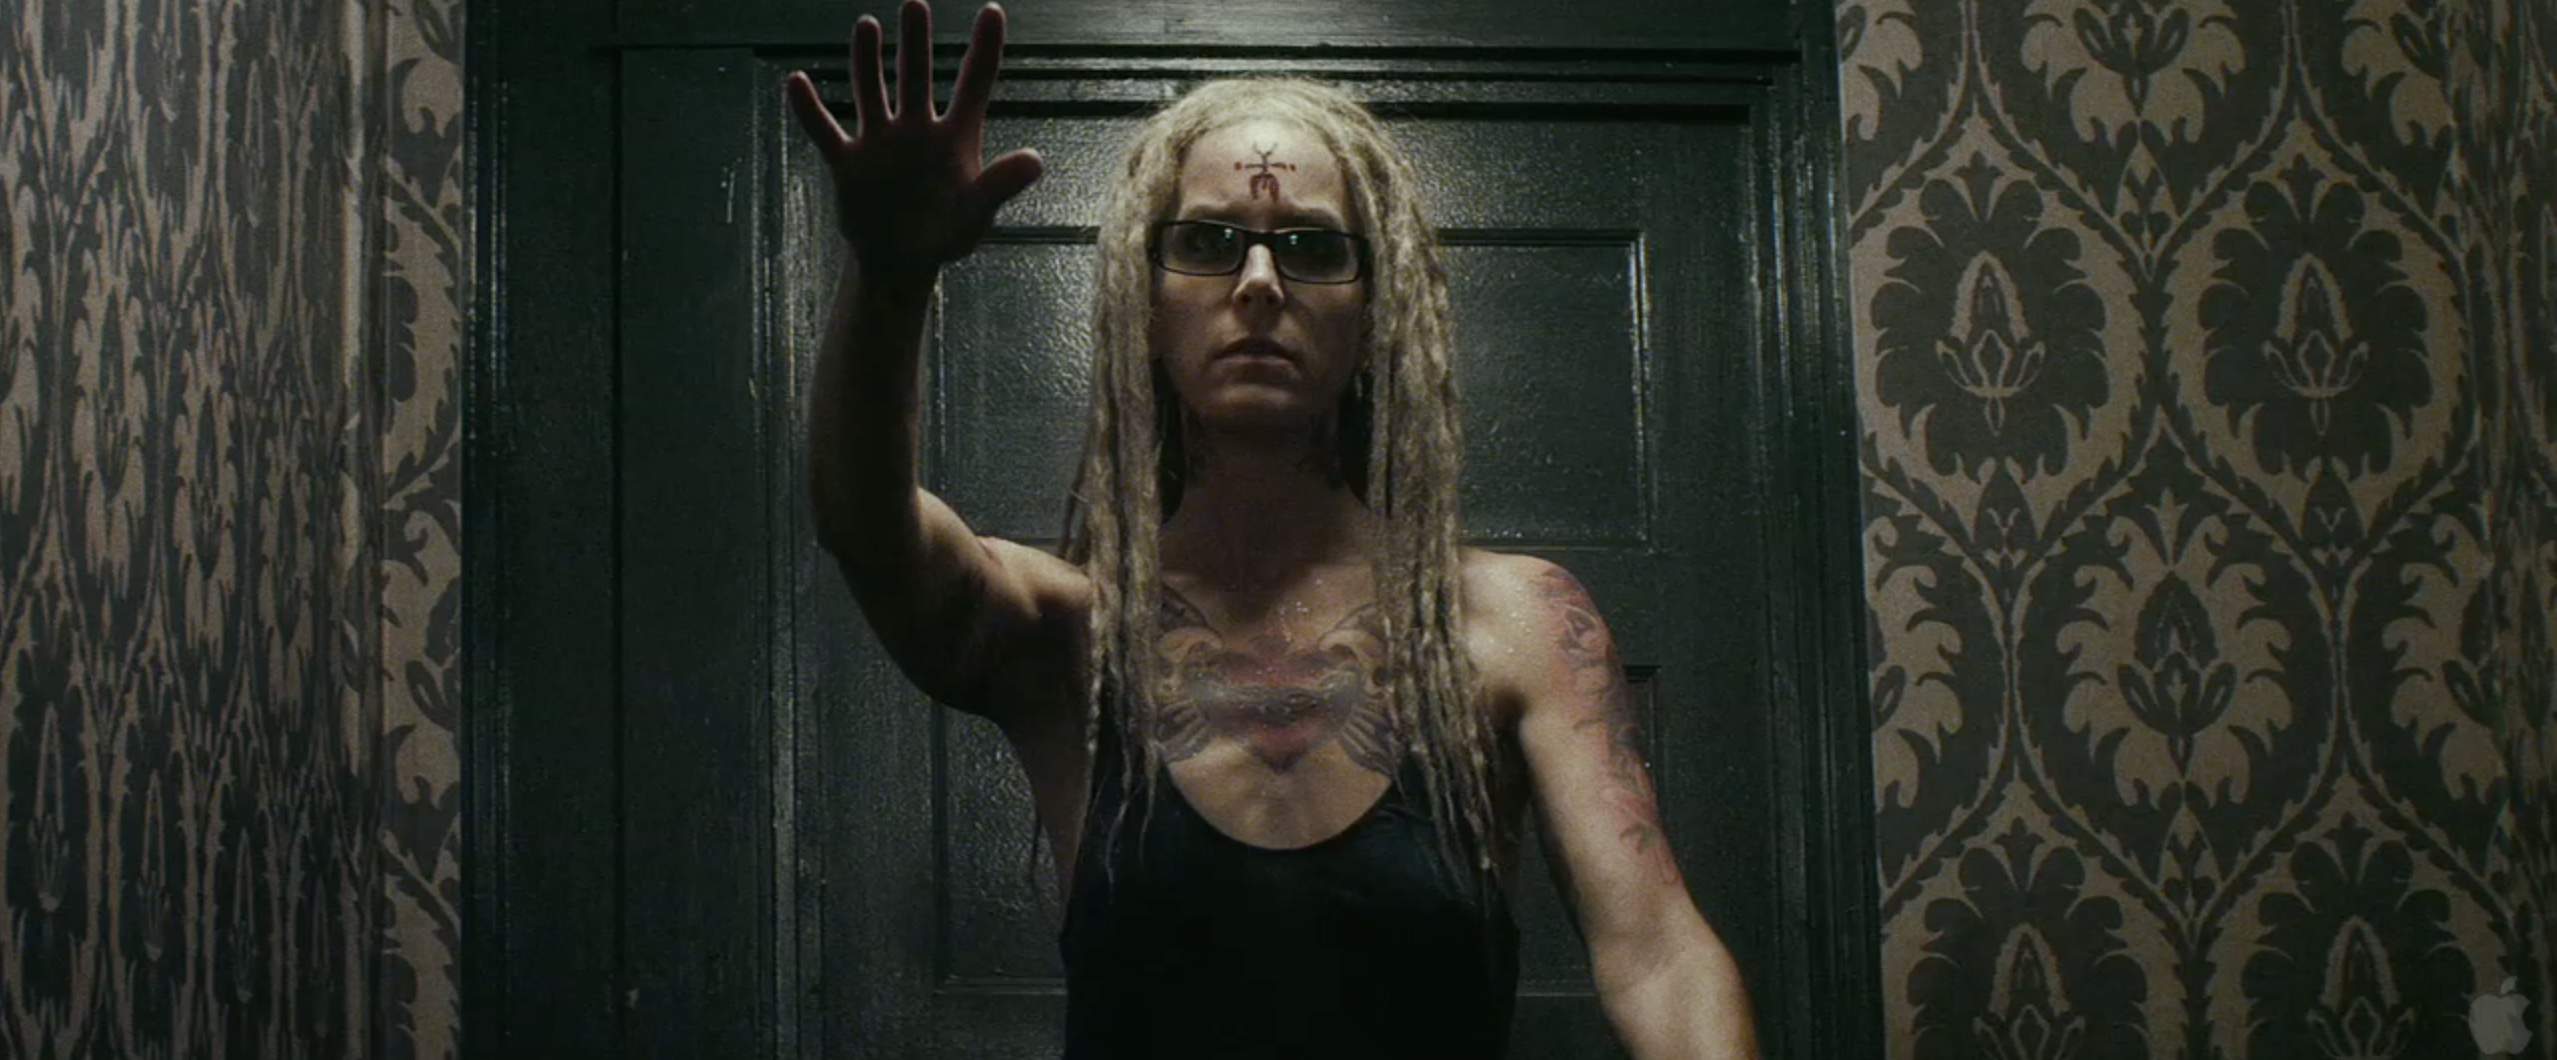 HQ Lords Of Salem Wallpapers | File 2838.18Kb